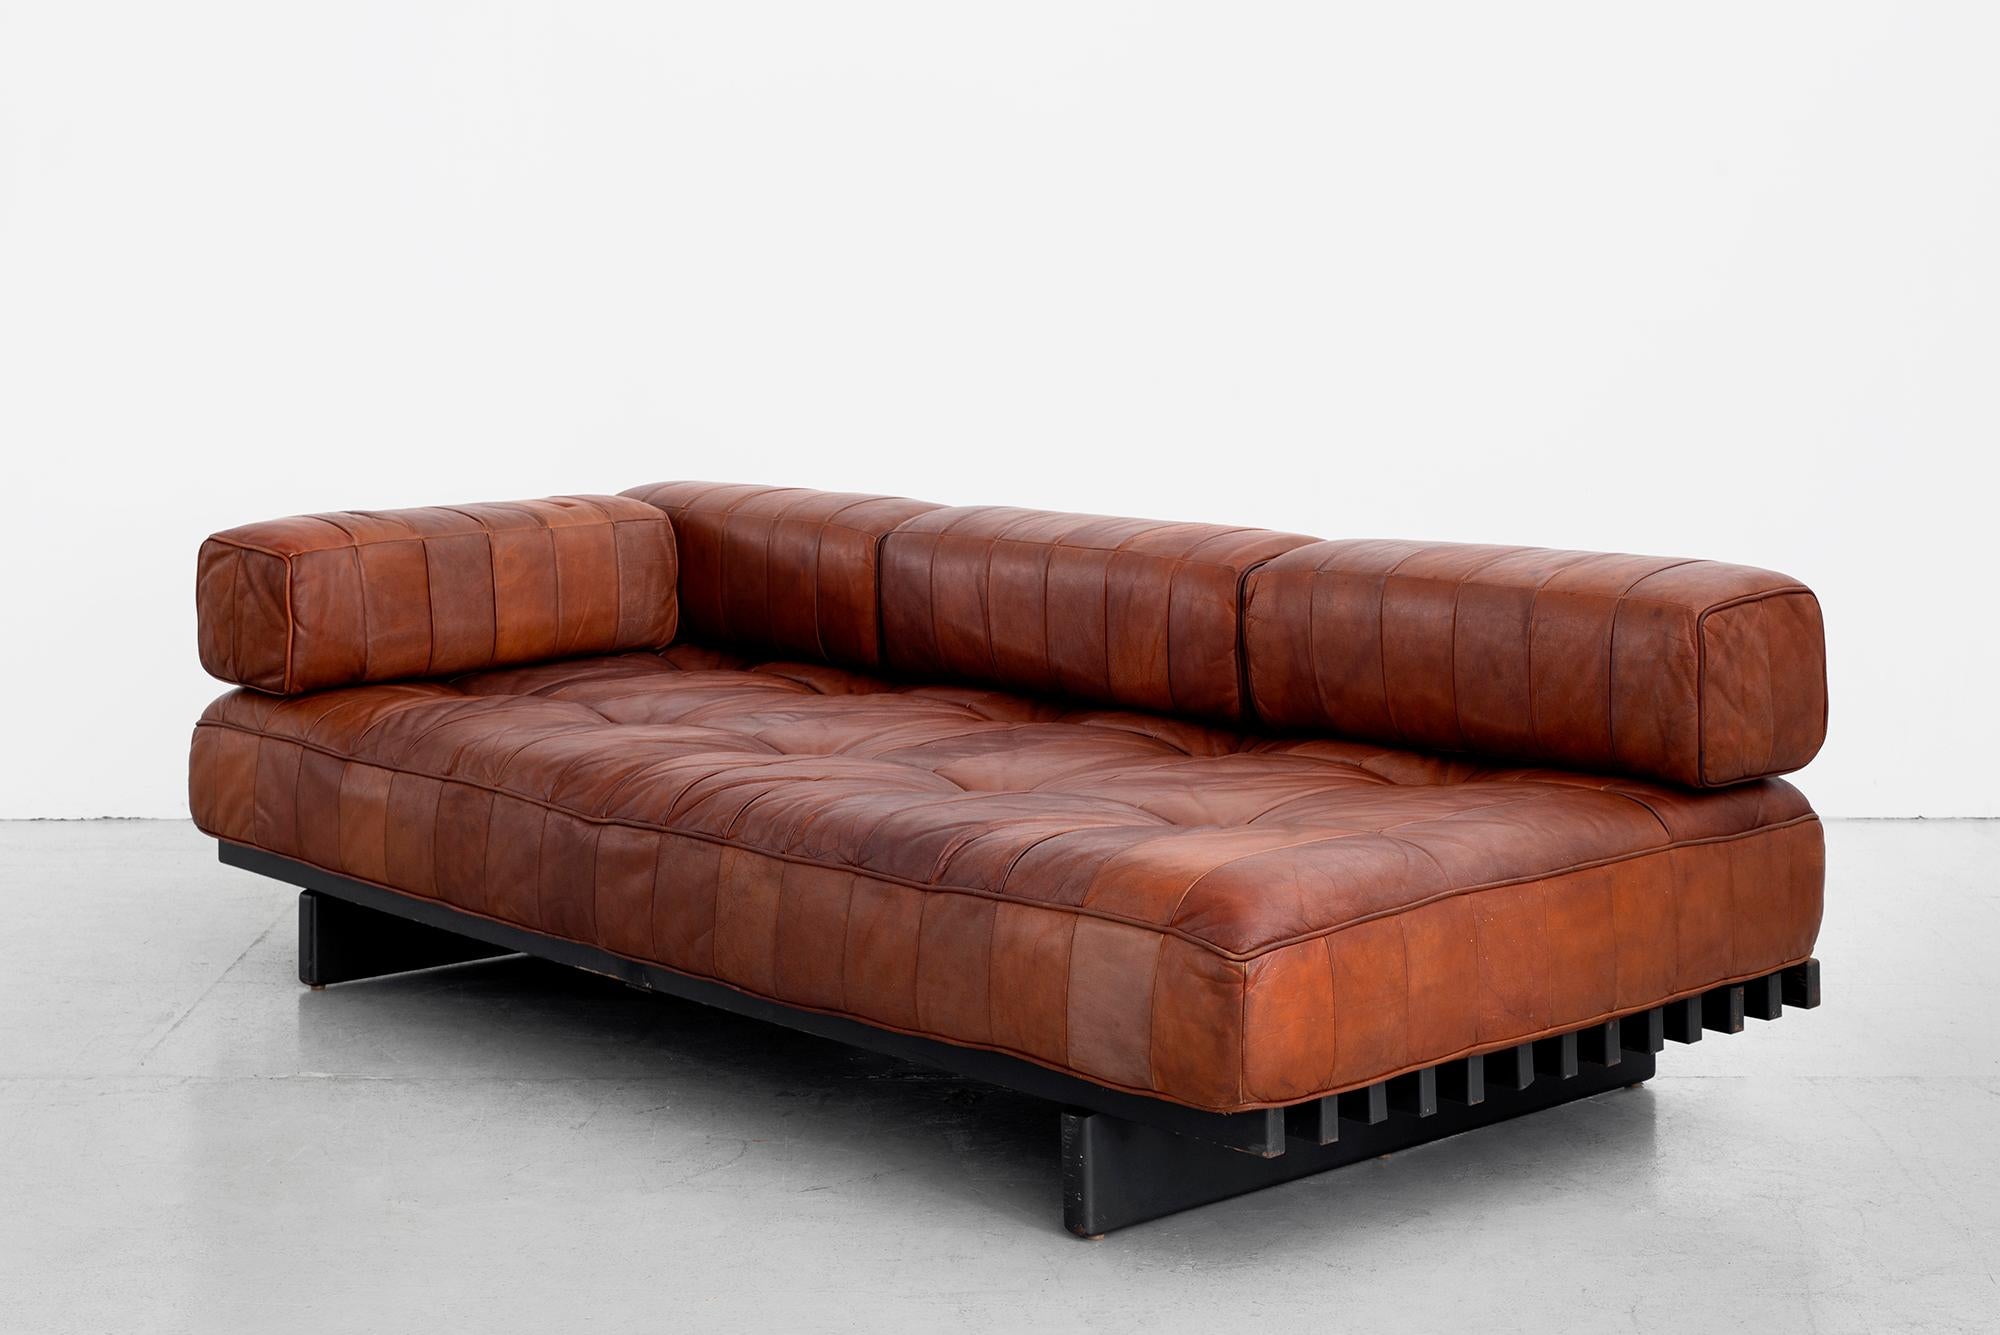 Gorgeous De Sede daybed DS 80 in cognac leather with original head rest and cushions.
Signature patchwork leather has wonderful patina and sits on a slatted bench.
Slatted black wood frame is original condition and shows wear suitable to its age.